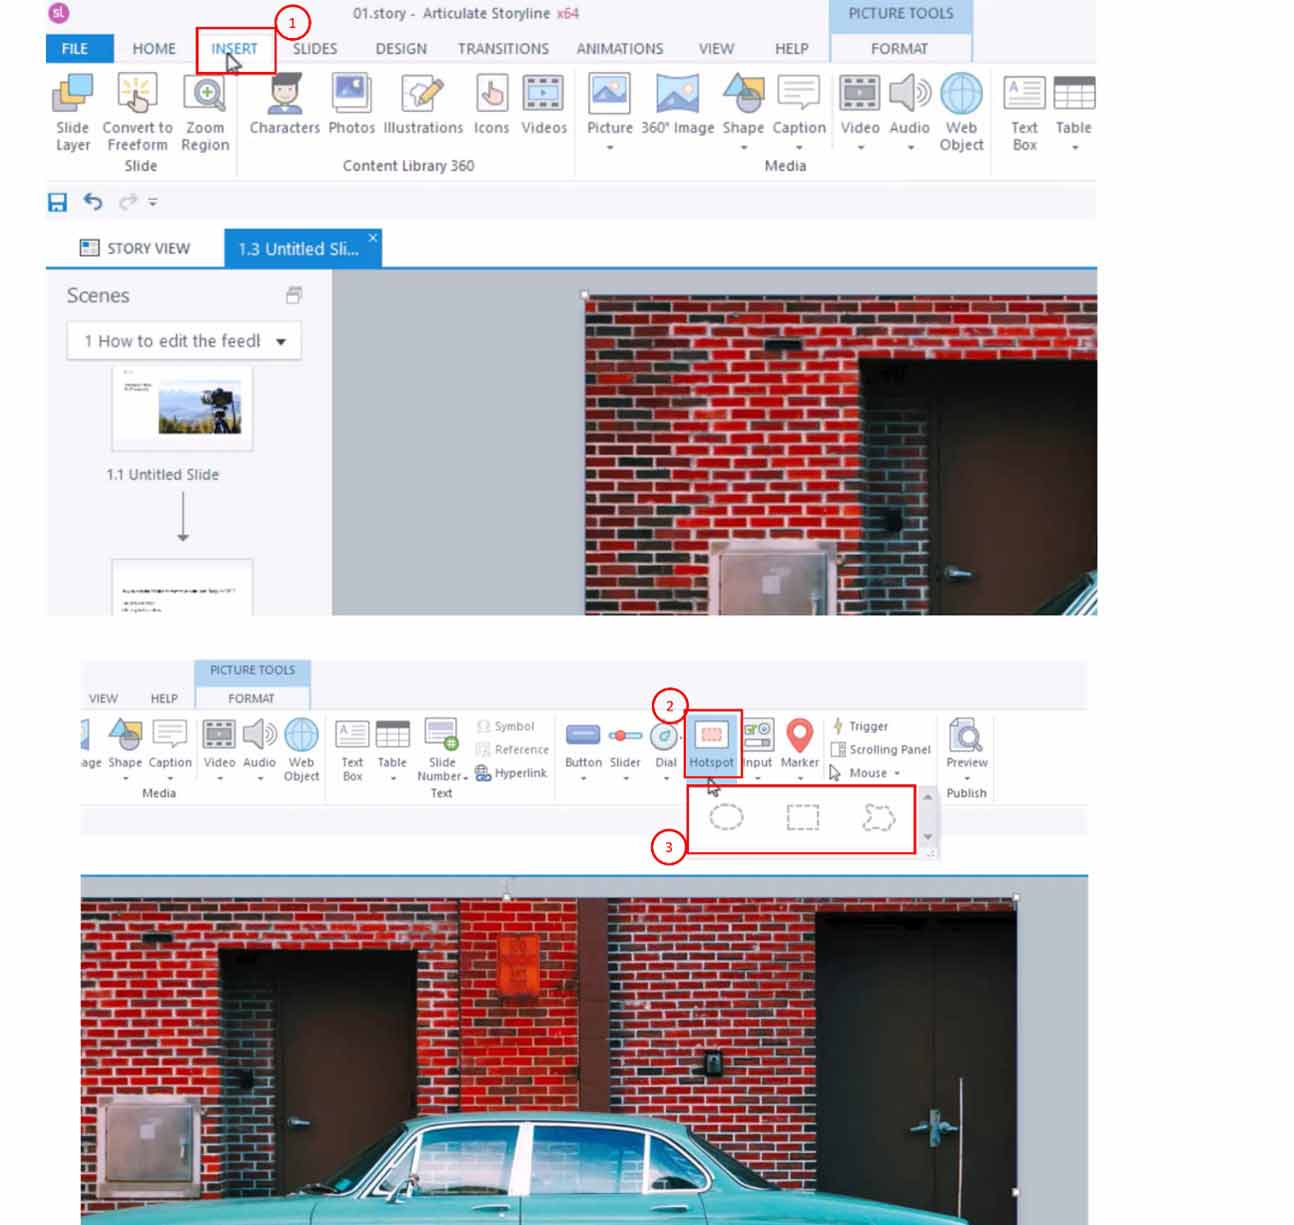 How to Include Hotspots in Articulate Storyline 360- Inserting Hotspots